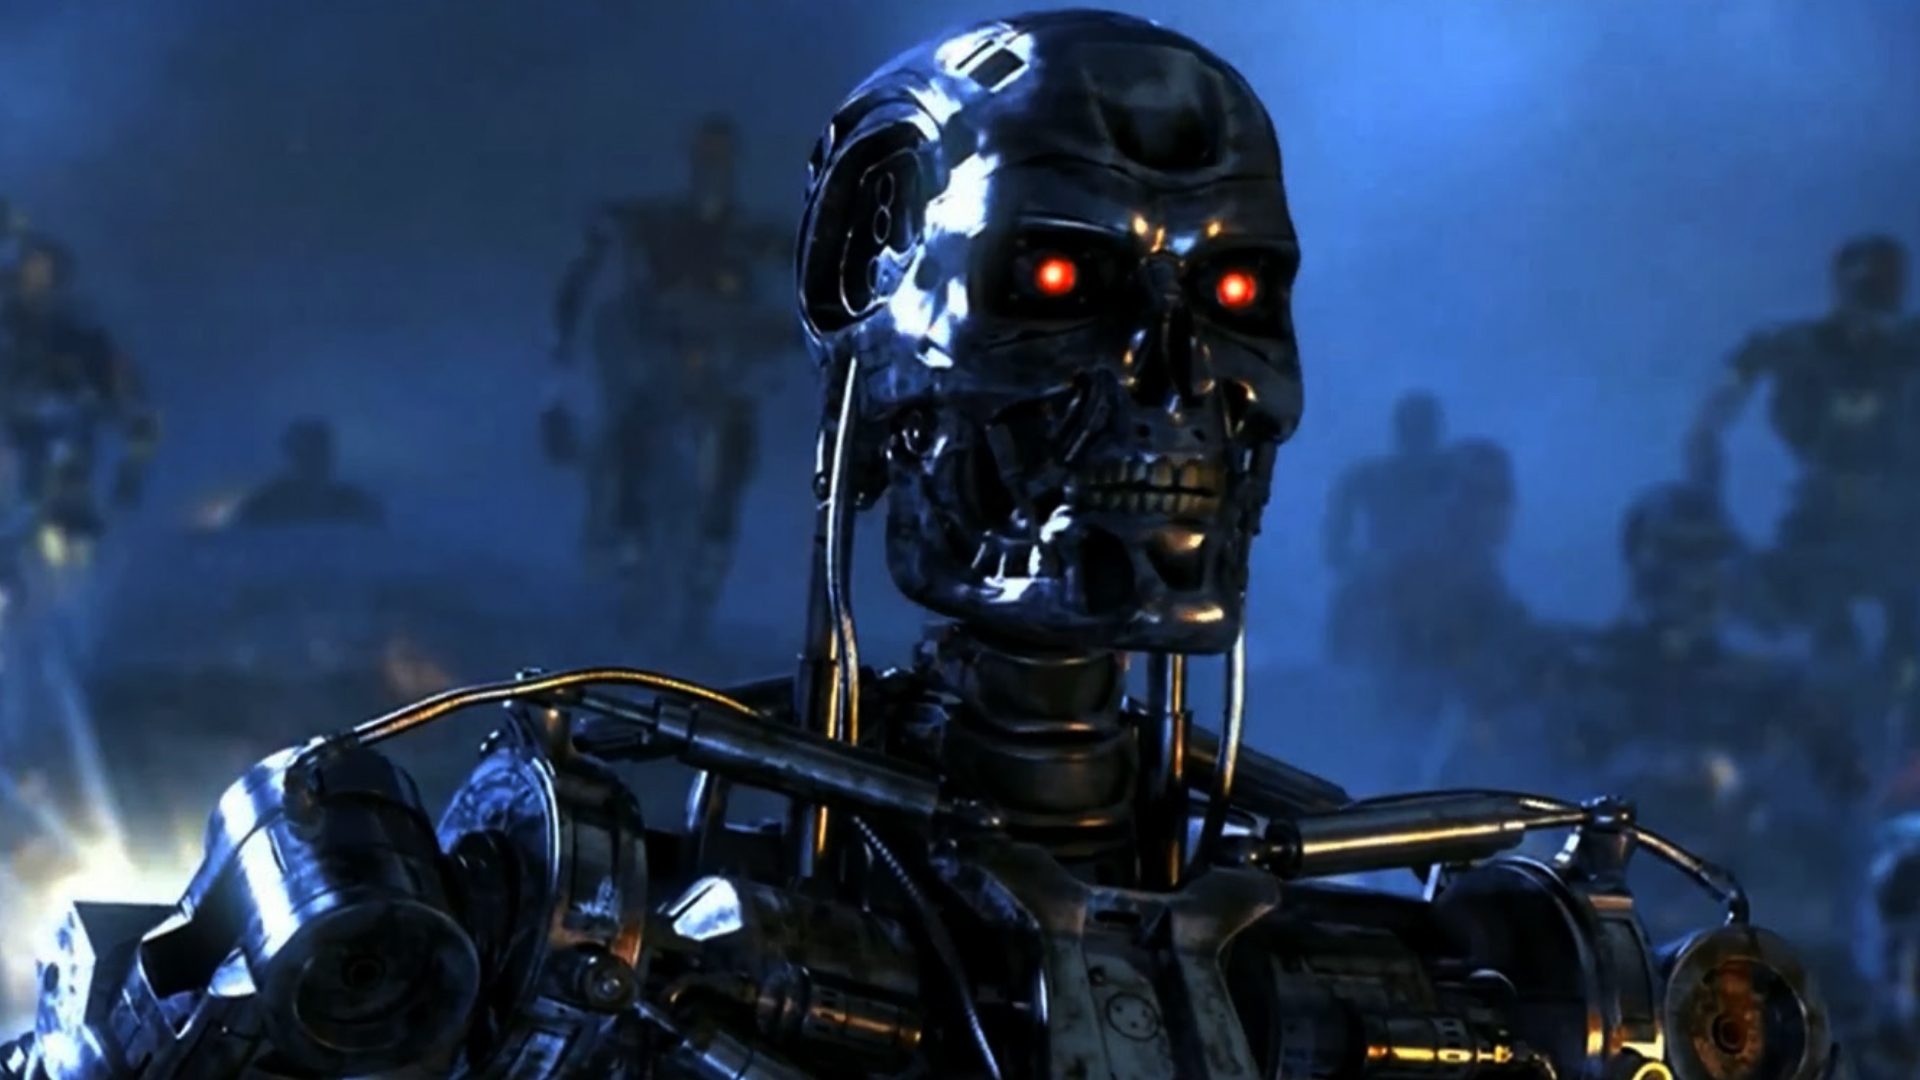 Terminator Genisys Wallpapers Pictures Images HD Wallpapers Download Free Images Wallpaper [wallpaper981.blogspot.com]